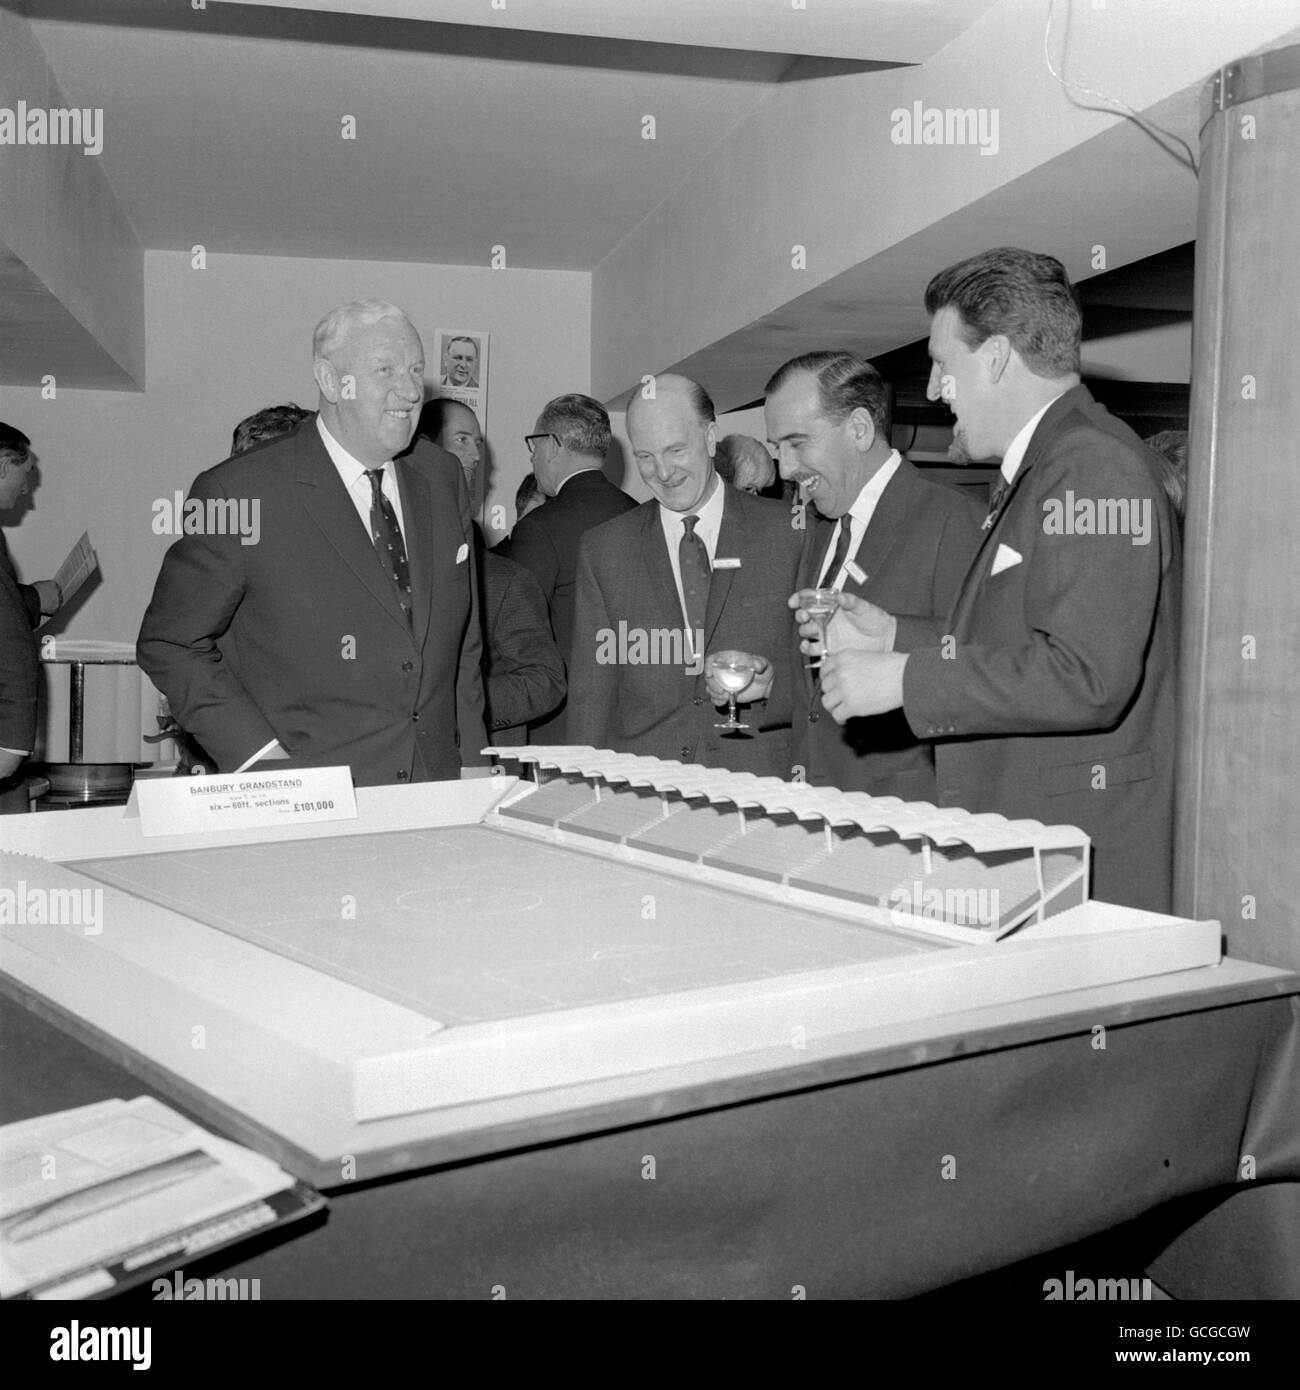 Sir Stanley Rous, President of FIFA, left, viewing a model of a sectionalised concrete grandstand which has been designed as a solution to soccer clubs' ground improvement problems. The six section model is similar to one at the Coventry City ground, and was on view at a cocktail party given at The Savoy Hotel, London, by Banbury Grandstands Ltd. Left to right: Sir Stanley Rous; Stan Cullis, general manager of Banbury Grandstands; Derek Robins, chairman of Coventry City FC, and Jimmy Hill, manager of Coventyr City, and a director of Banbury Grandstands. Stock Photo